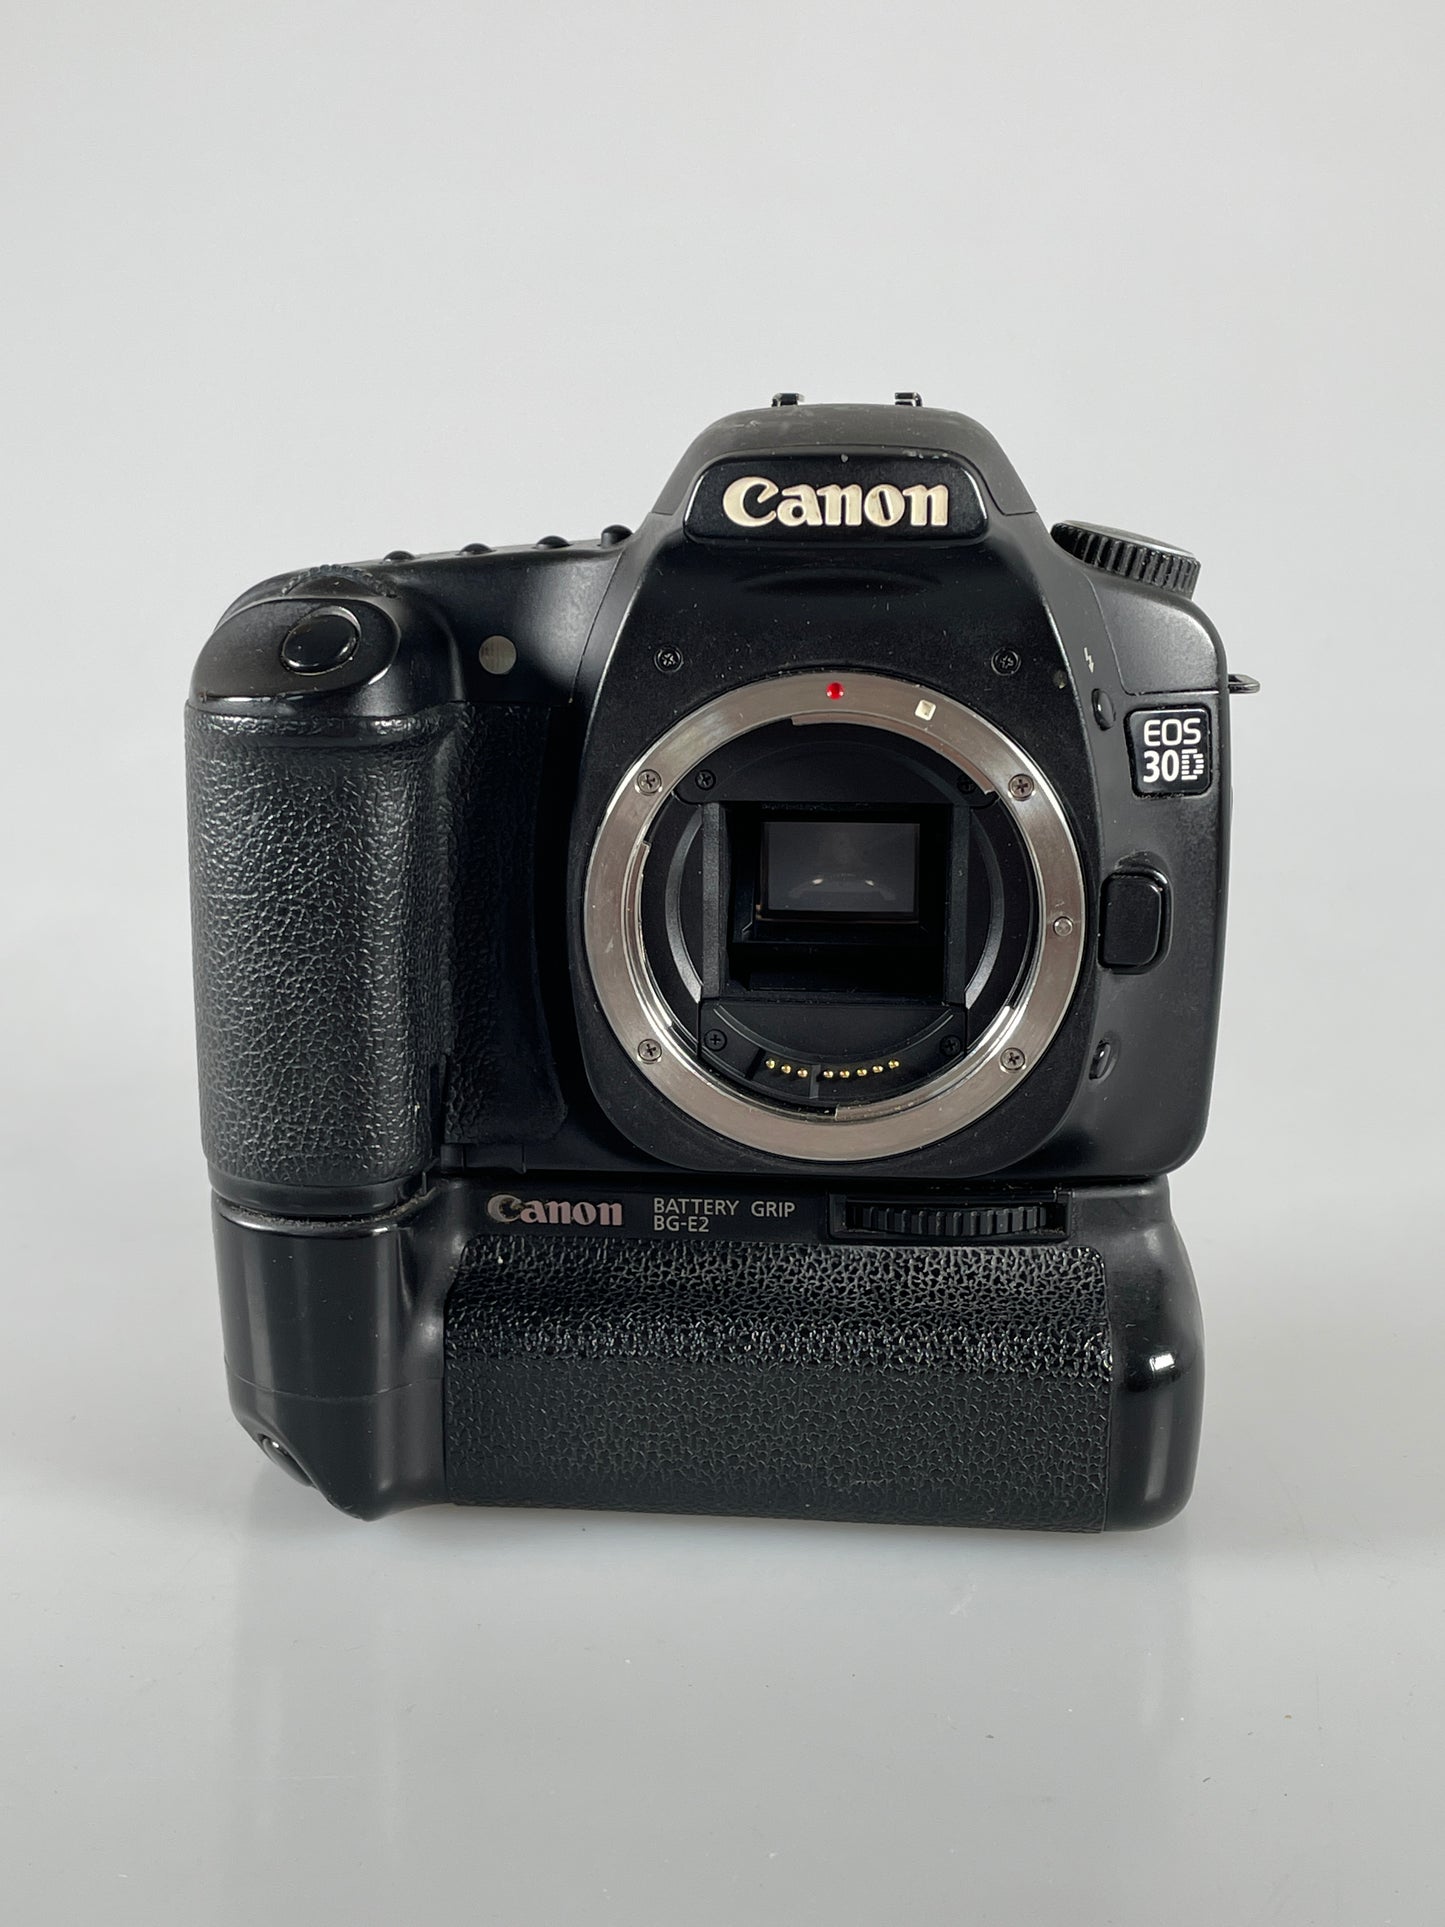 Canon 30D Digital SLR Camera Body 8.2MP with Battery grip